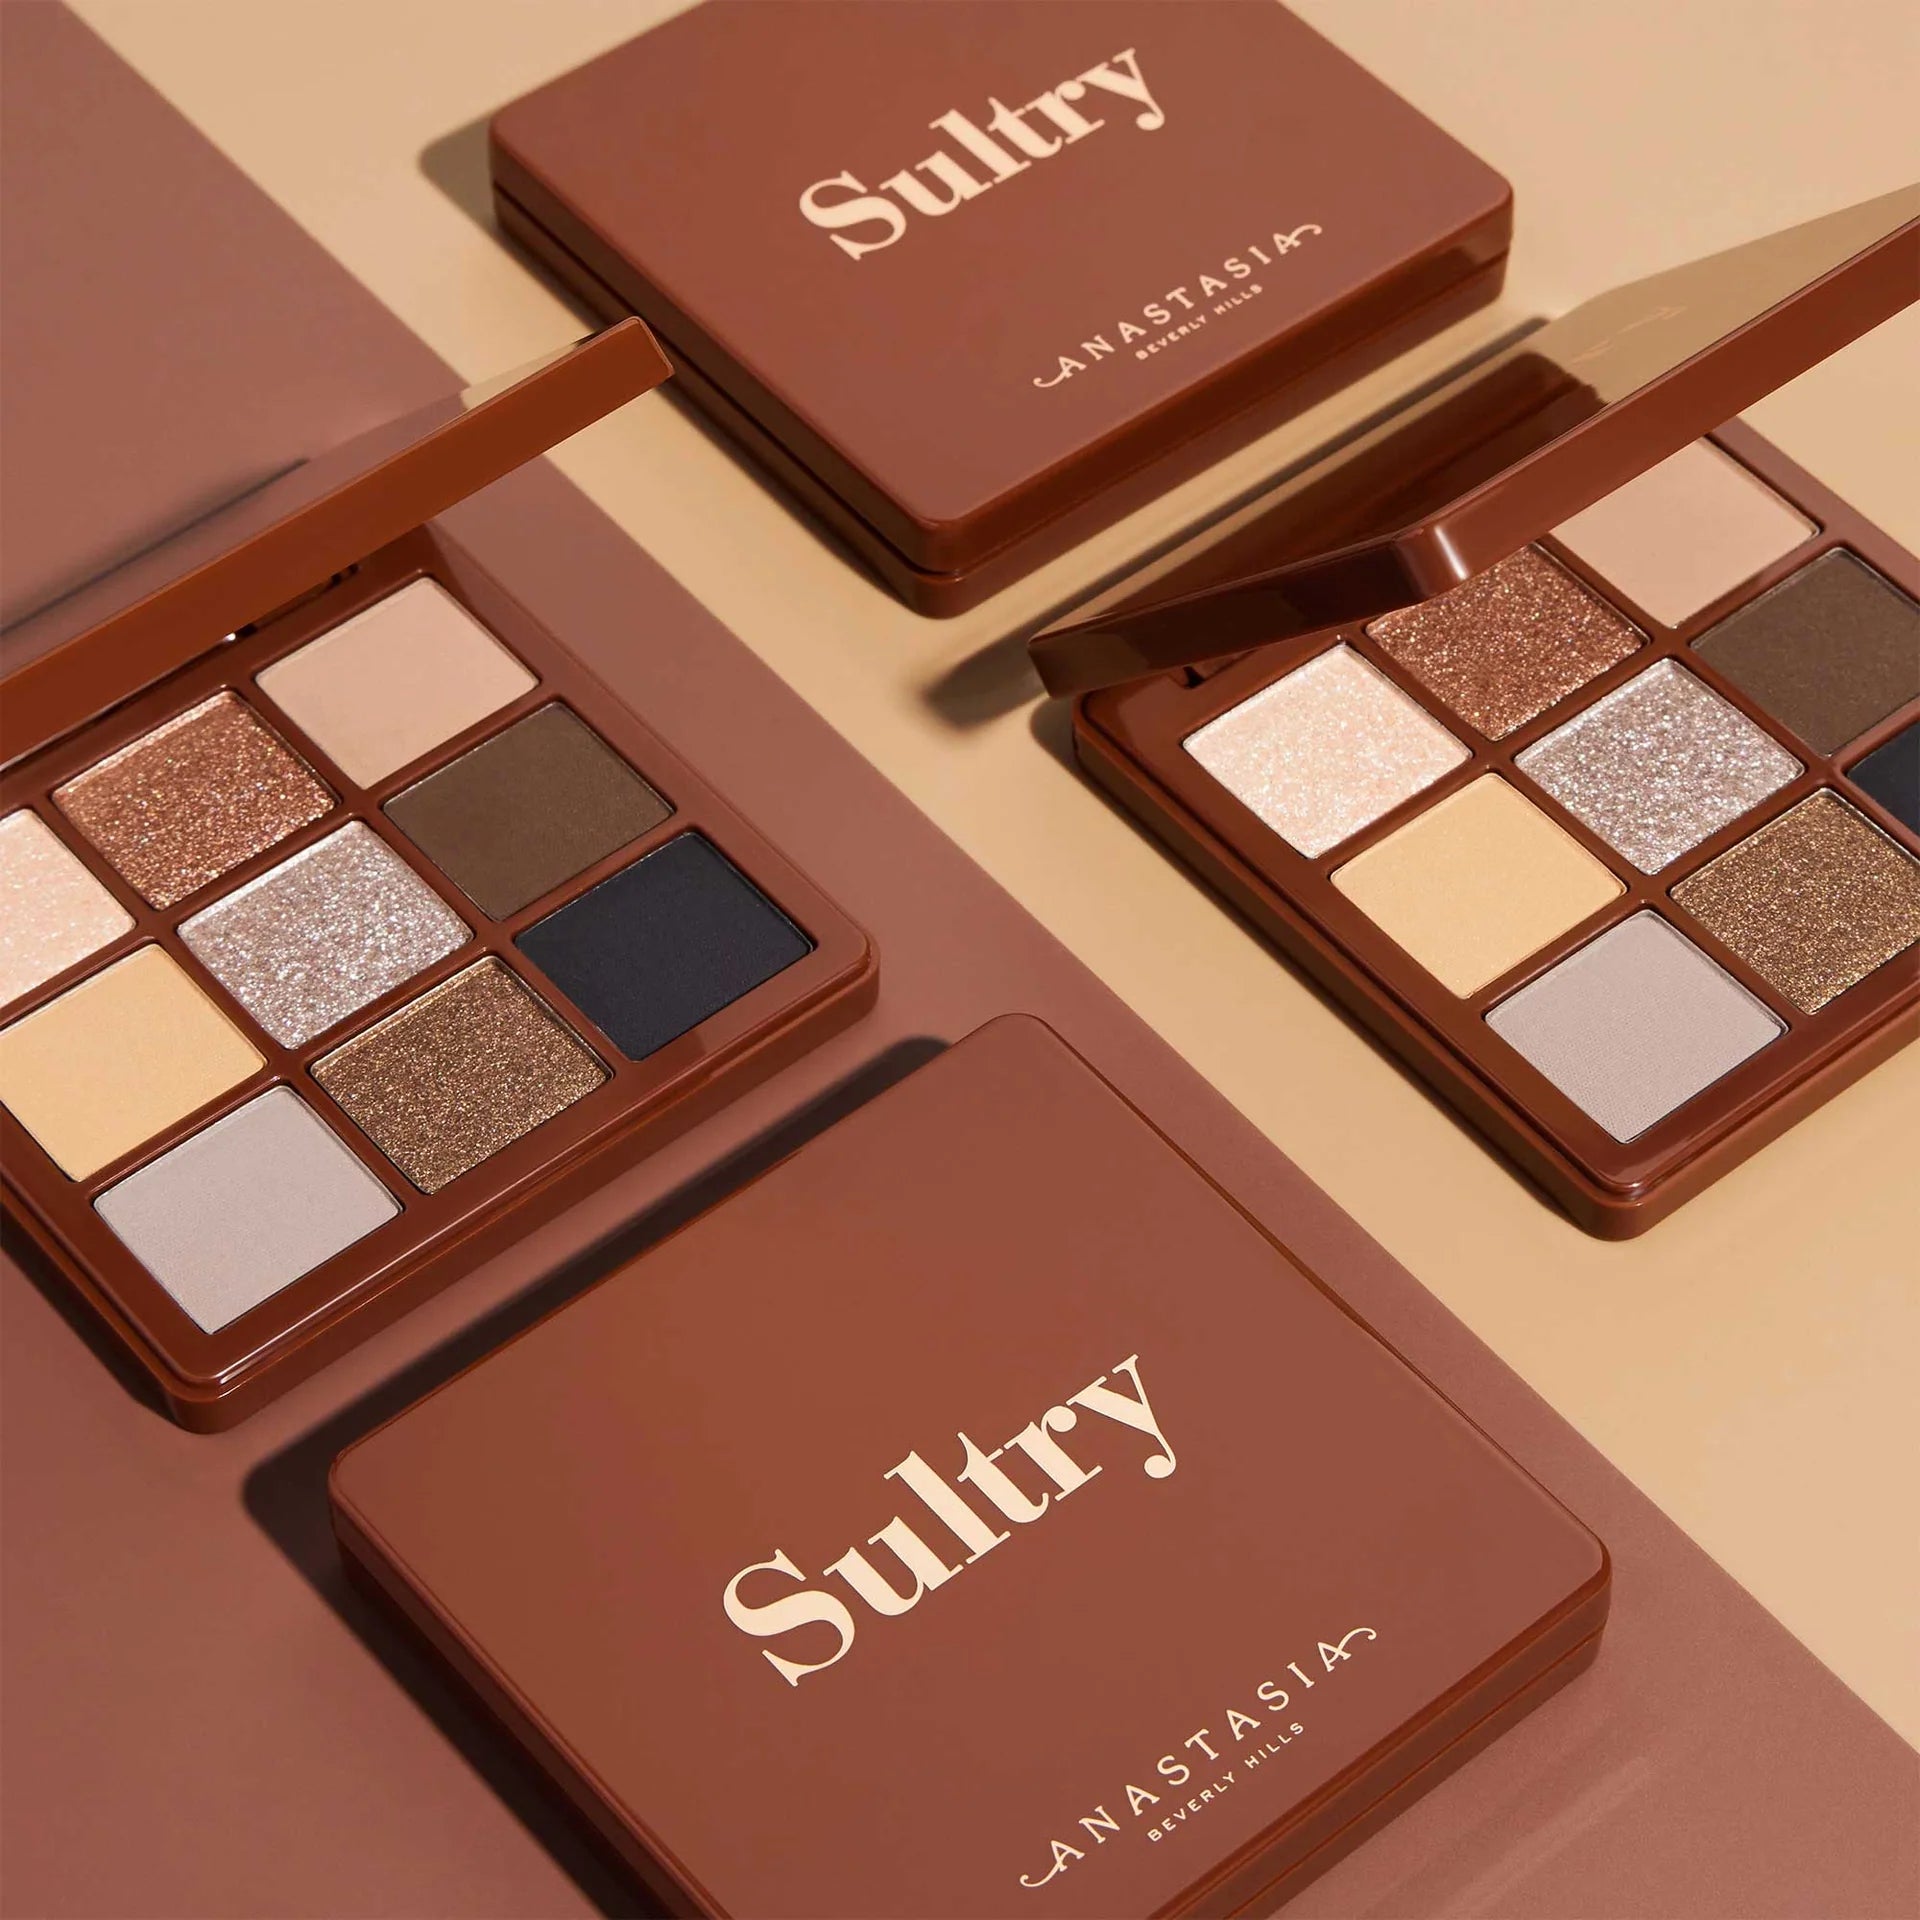 Mini Sultry Eyeshadow Palette